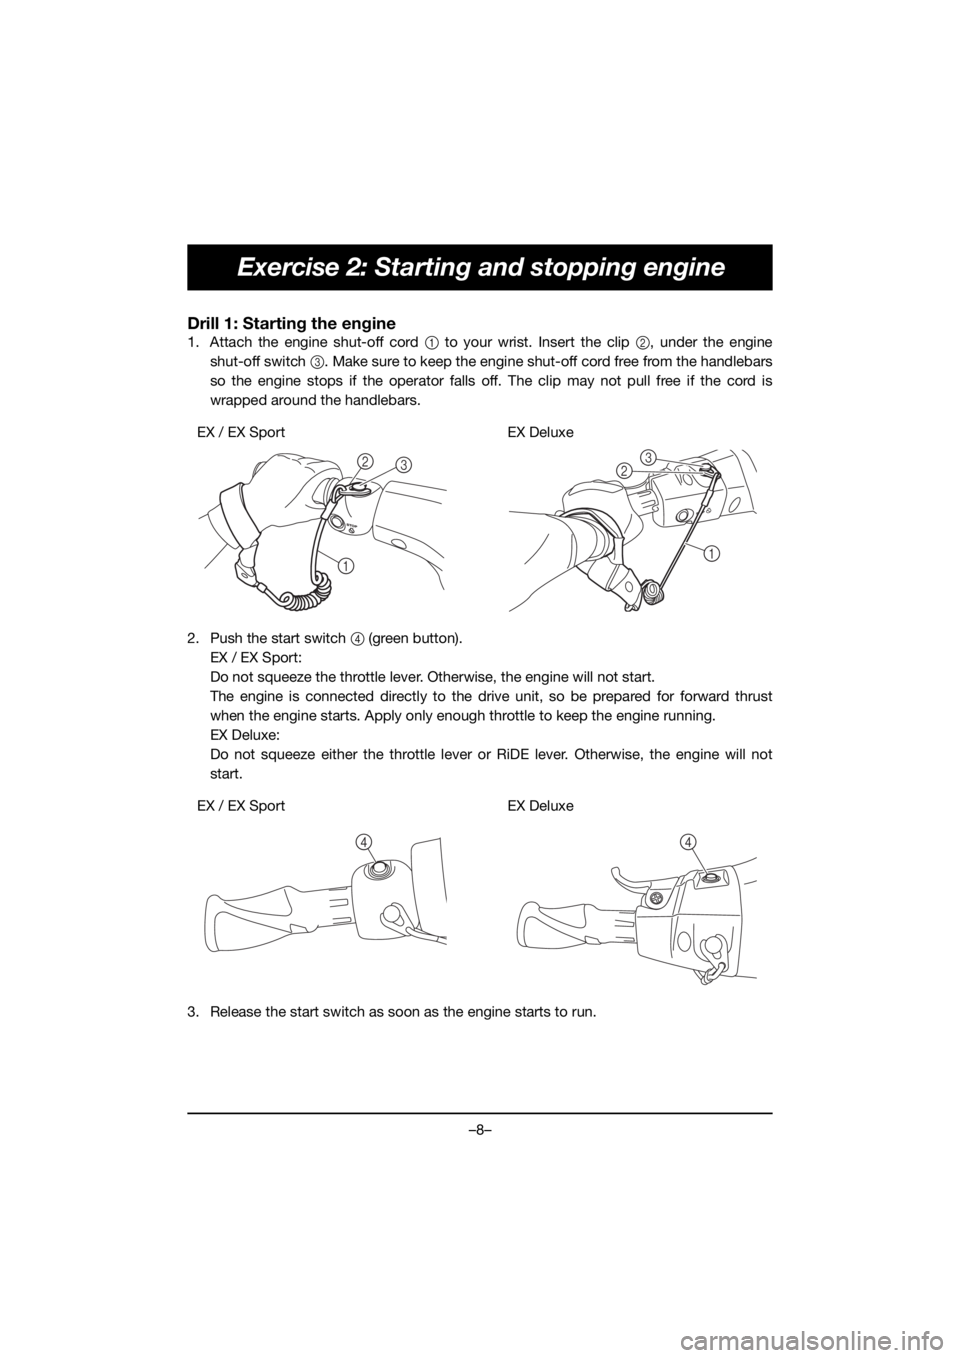 YAMAHA EX DELUXE 2019  Manuale duso (in Italian) –8–
Exercise 2: Starting and stopping engine
Drill 1: Starting the engine
1. Attach the engine shut-off cord 1 to your wrist. Insert the clip 2, under the engine
shut-off switch 3. Make sure to ke